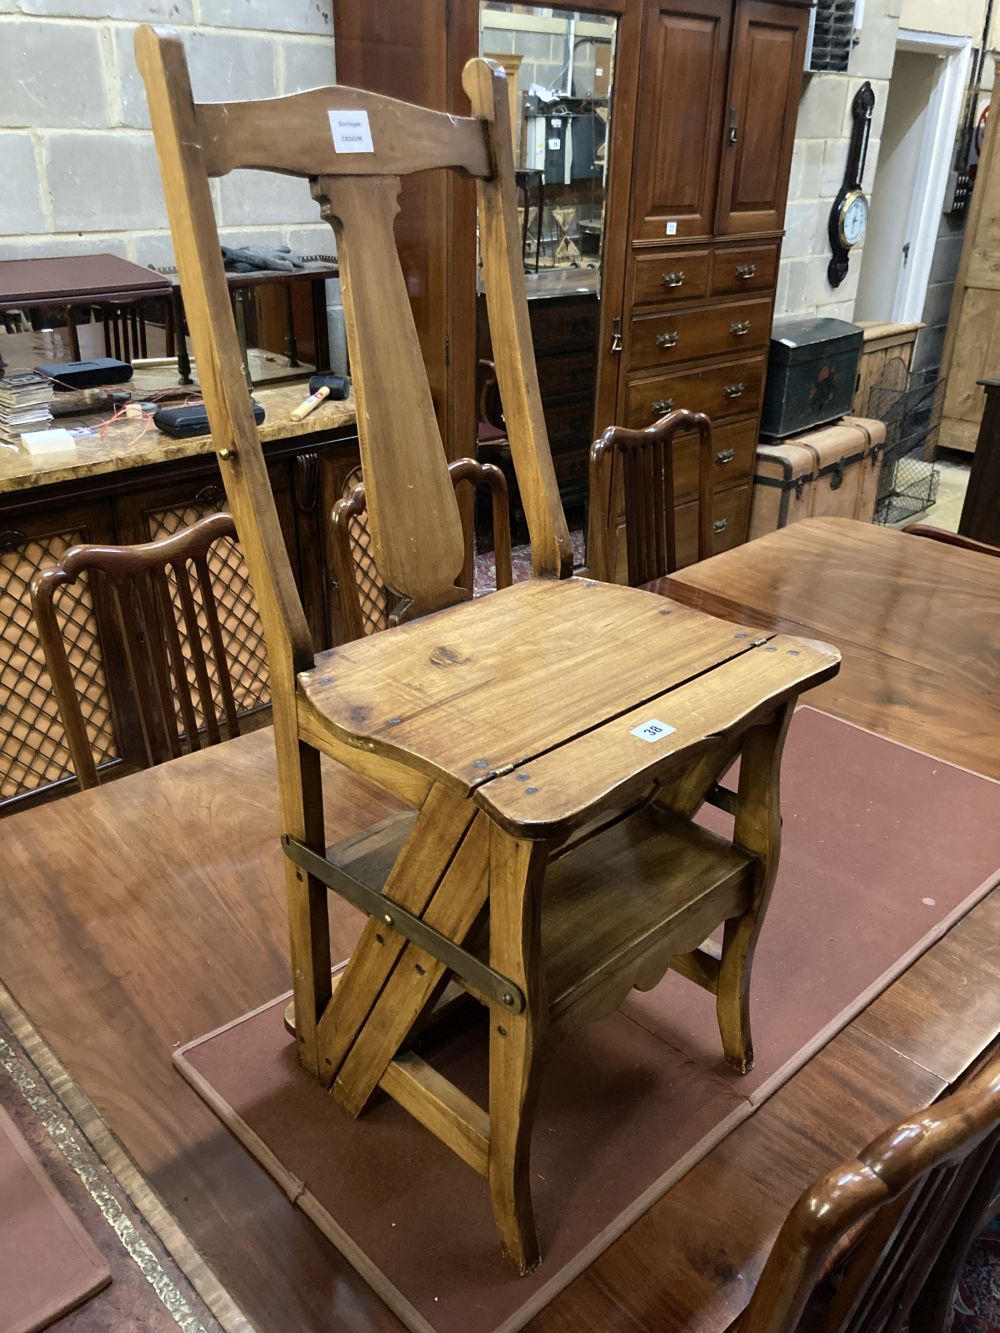 A 19th century metamorphic chair / library steps